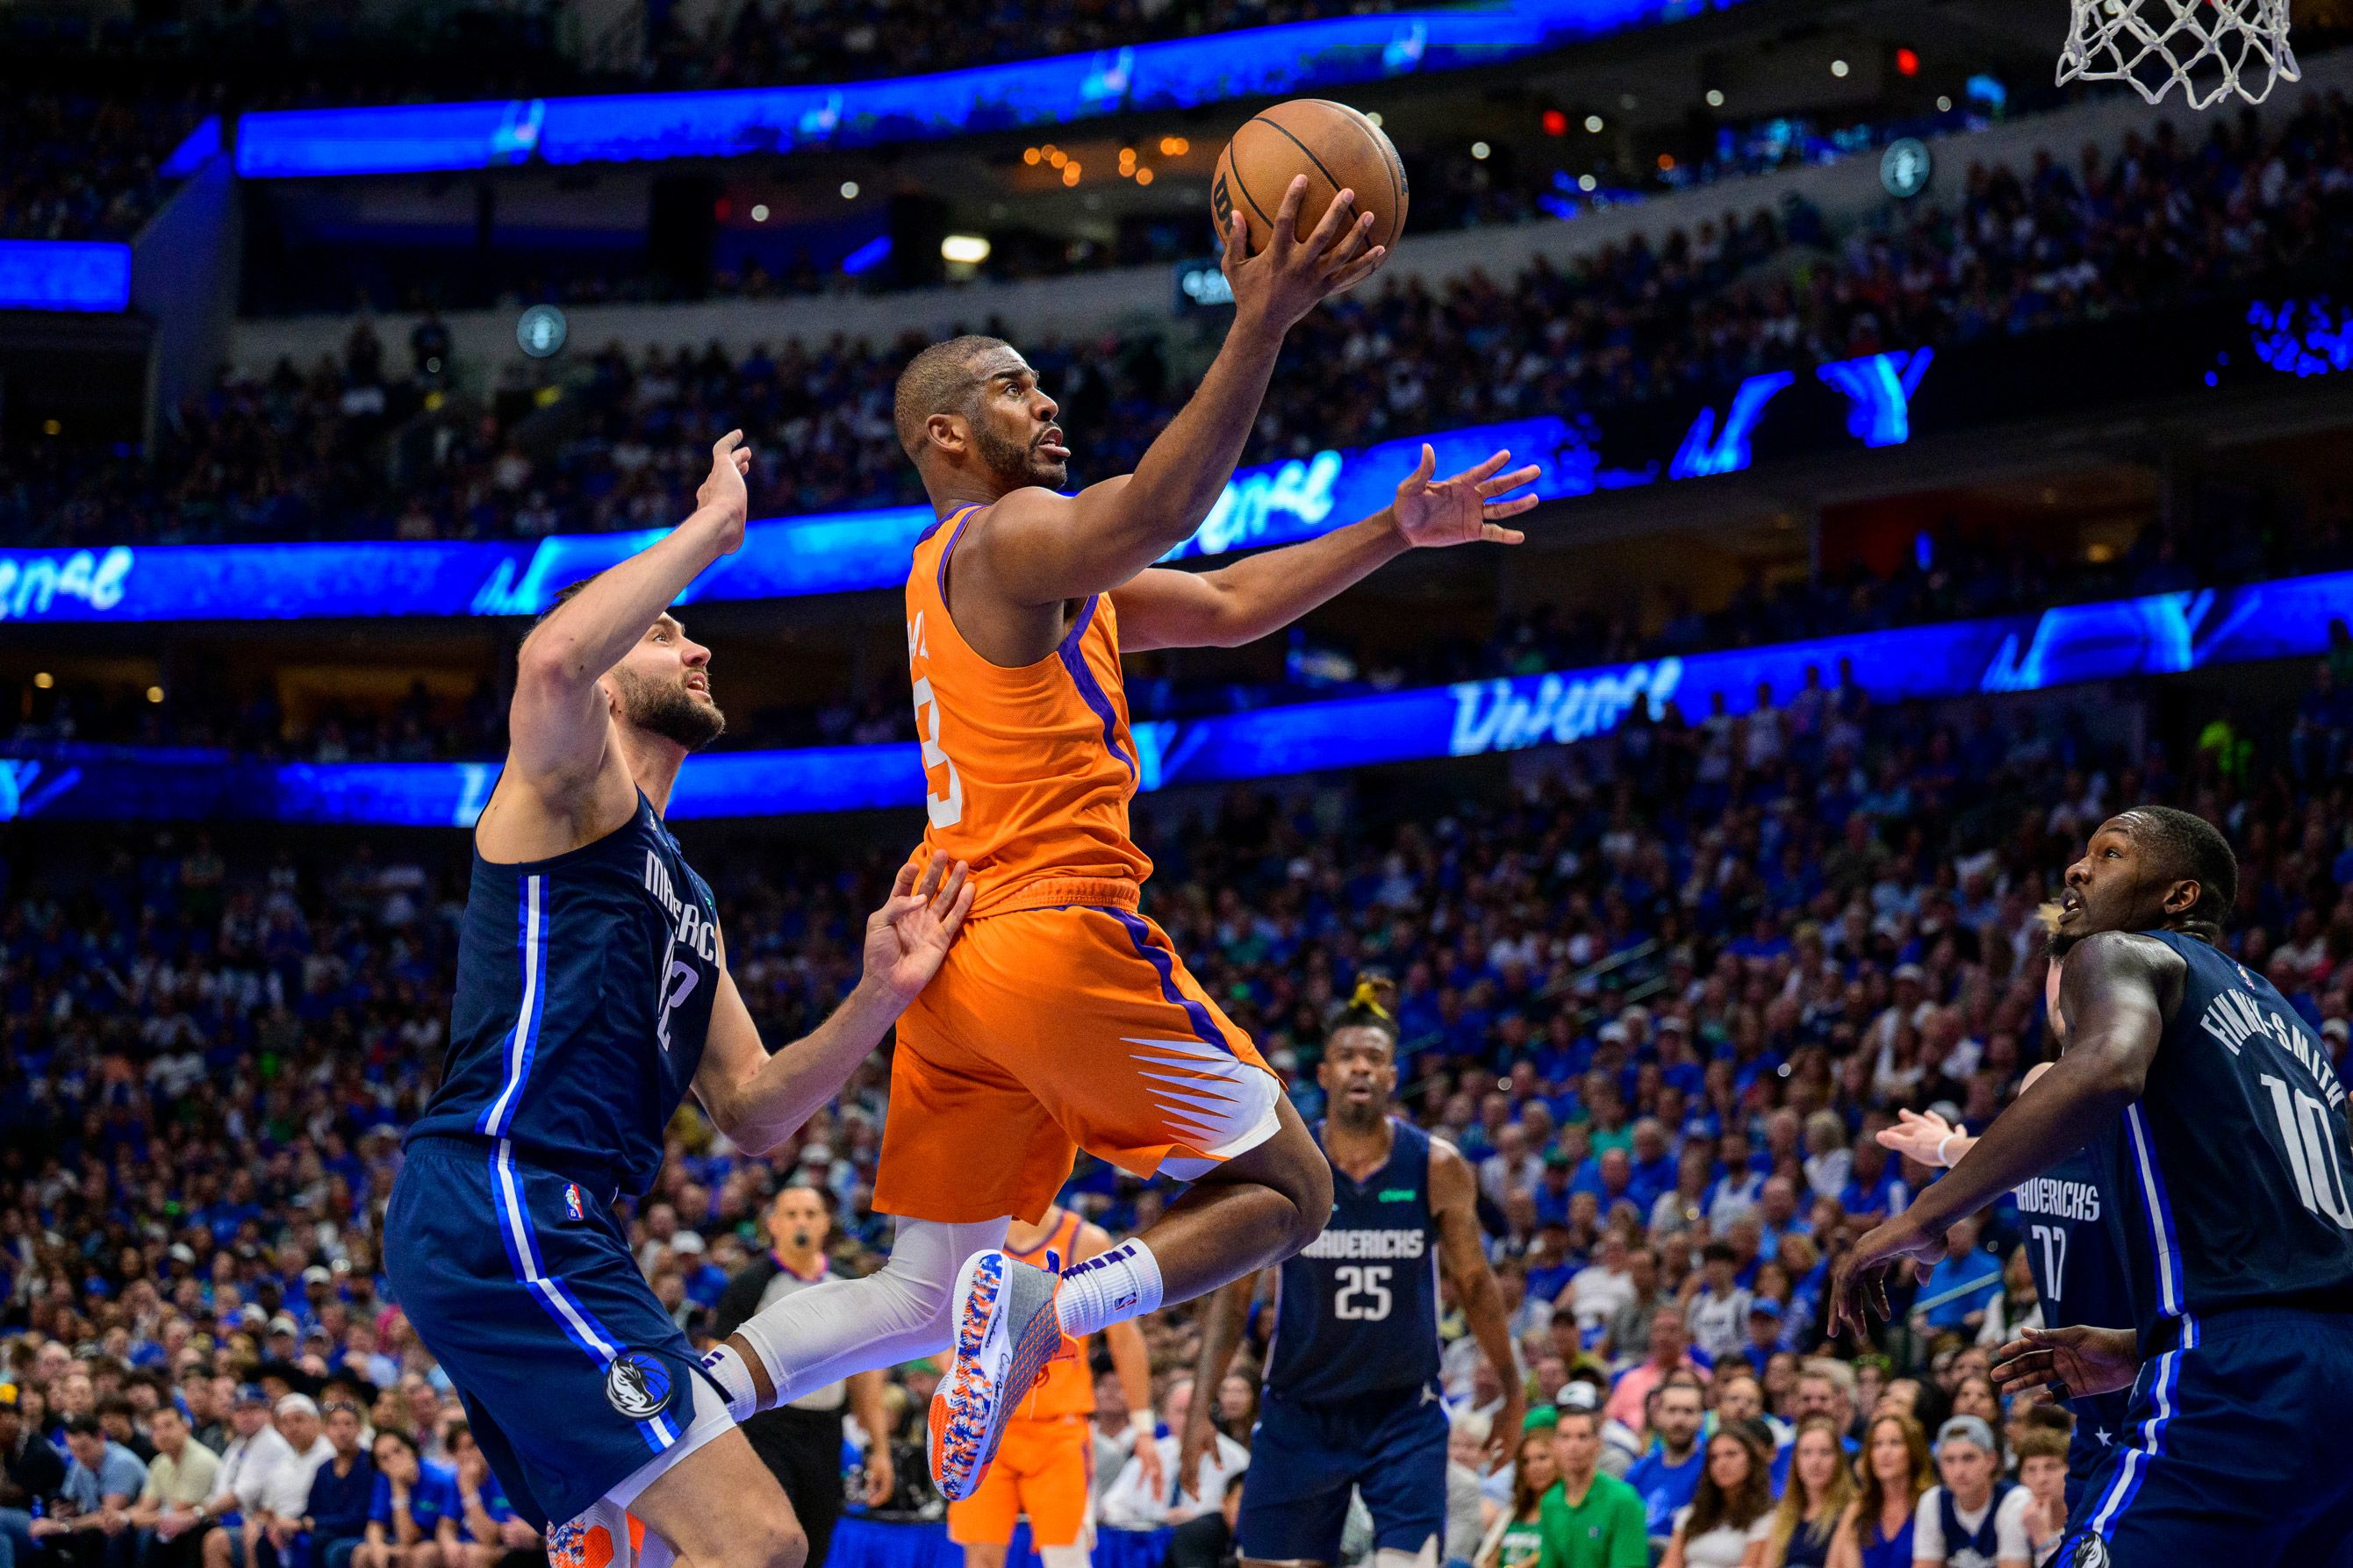 Chris Paul makes NBA playoff history in Phoenix Suns' closeout win